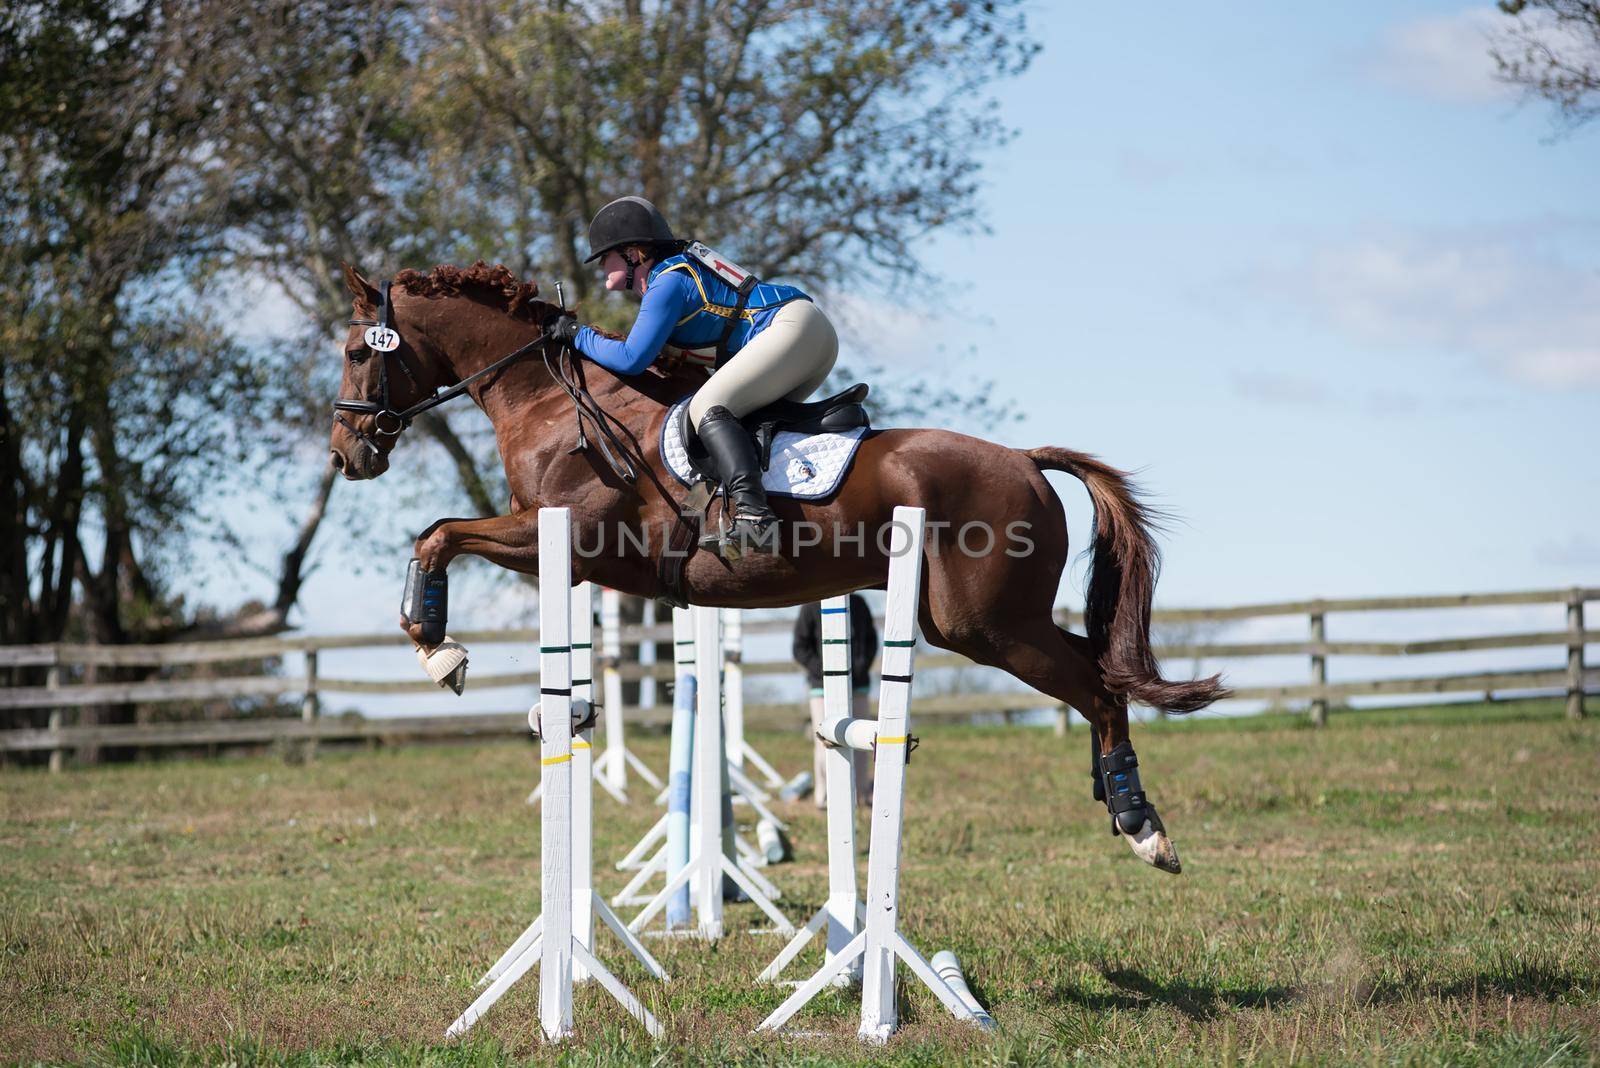 Equestrian competition photos including hunter jumper and cross country horse riders by jyurinko